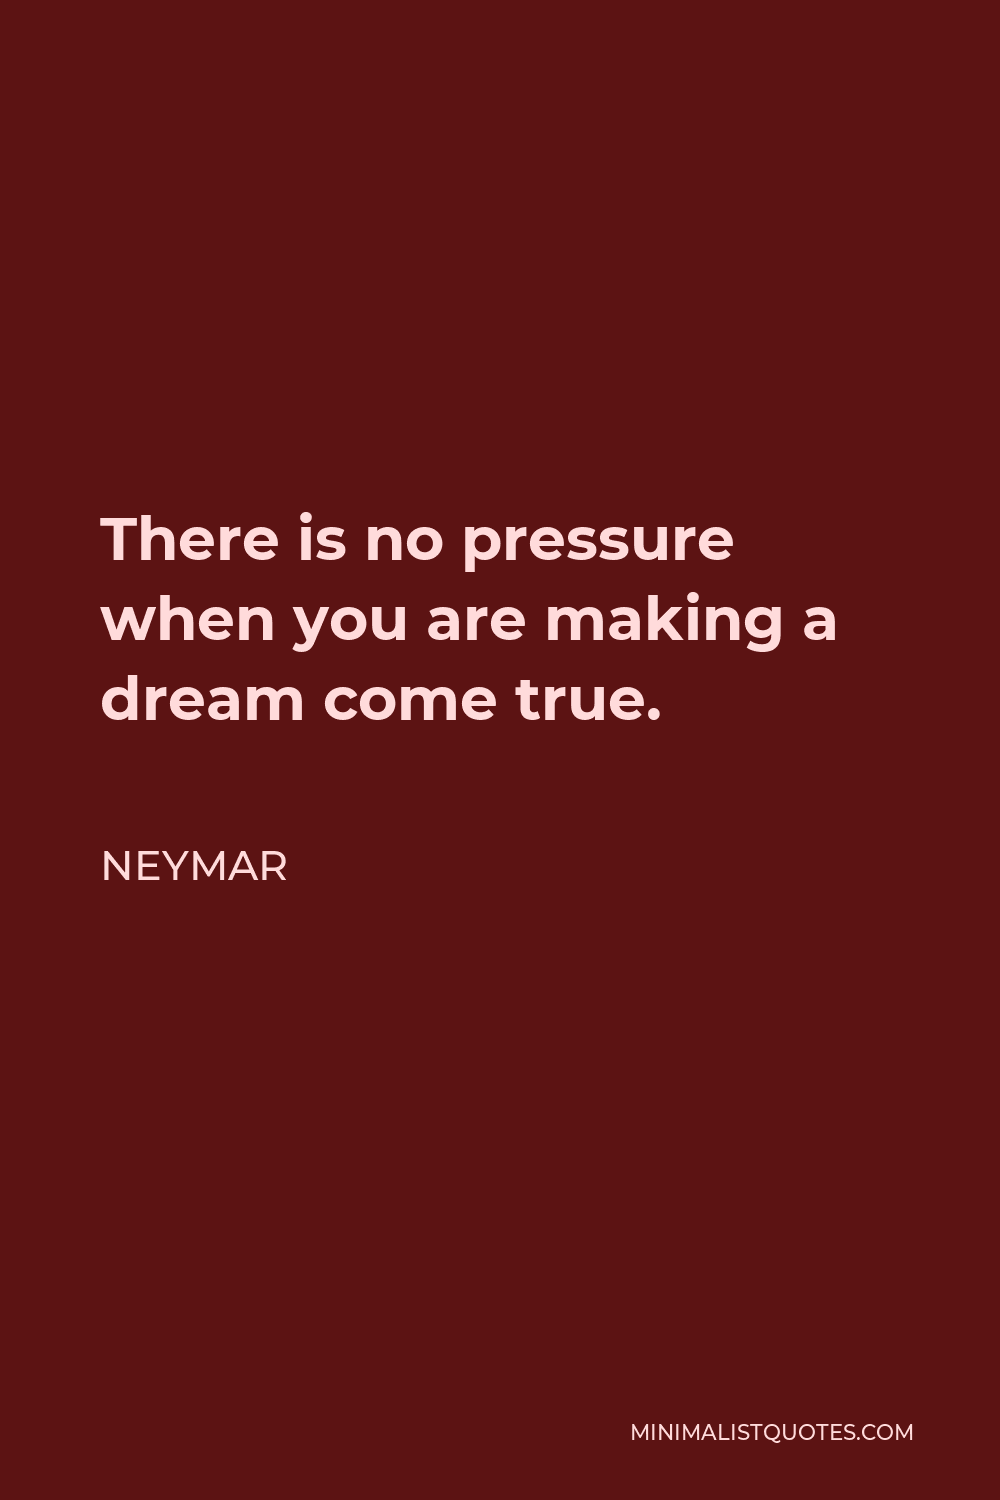 Neymar Quote - There is no pressure when you are making a dream come true.